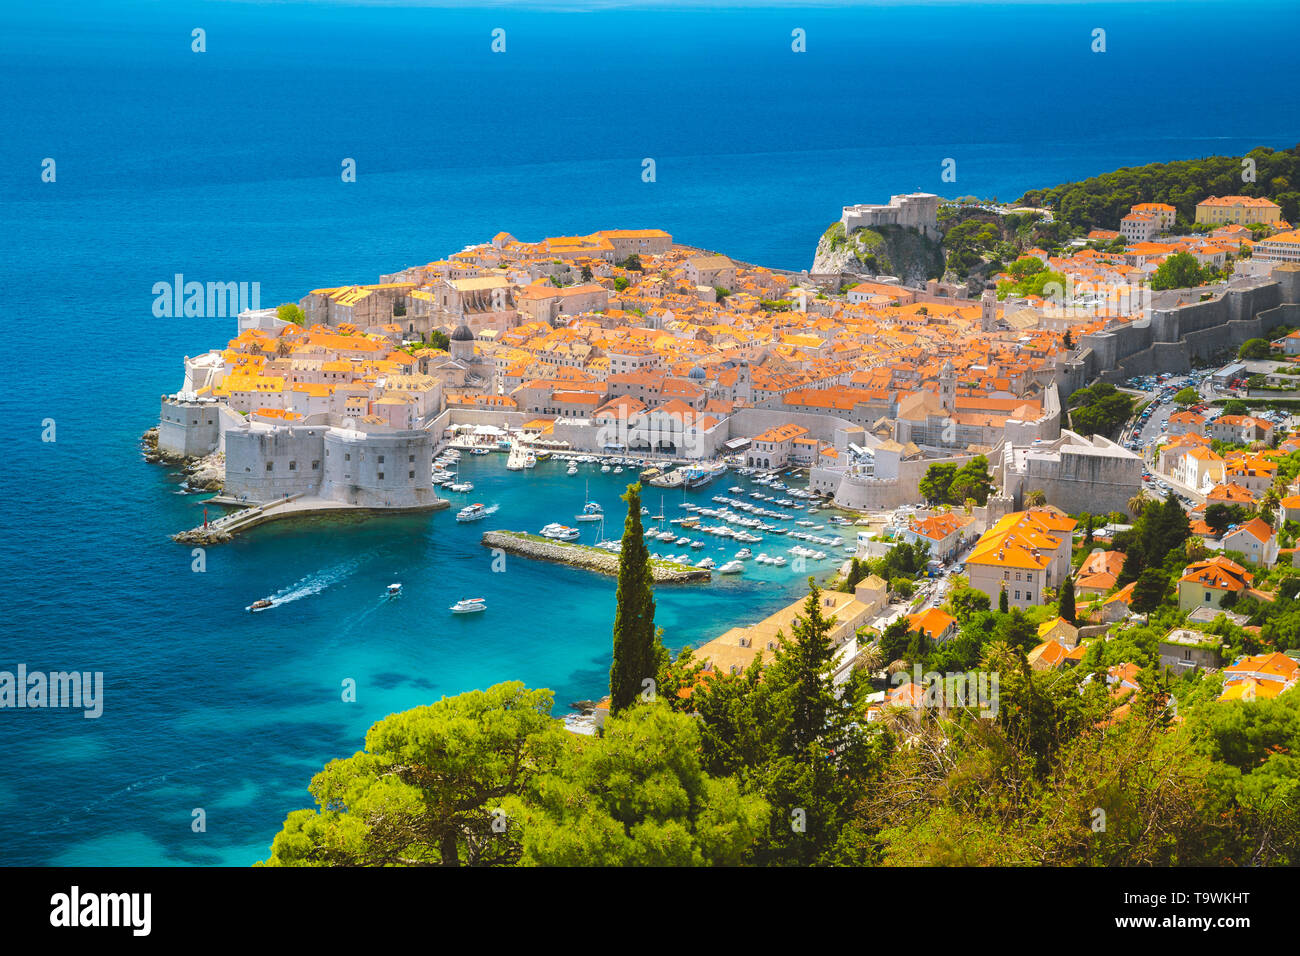 Panoramic aerial view of the historic town of Dubrovnik, one of the most famous tourist destinations in the Mediterranean Sea, from Srt mountain on a  Stock Photo